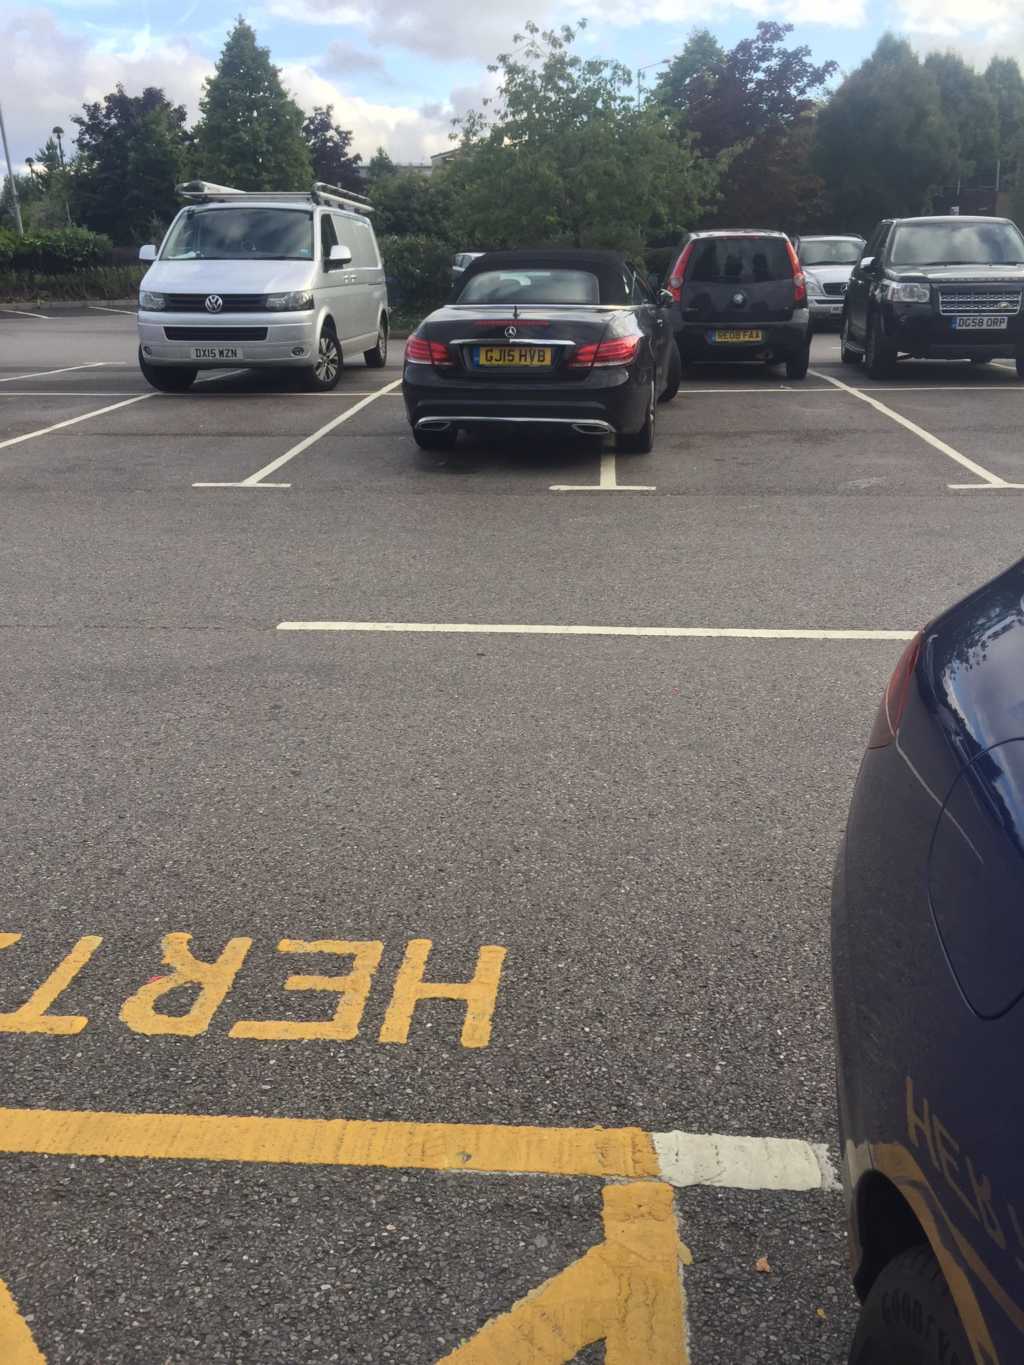 GJ15 HVB is an Inconsiderate Parker